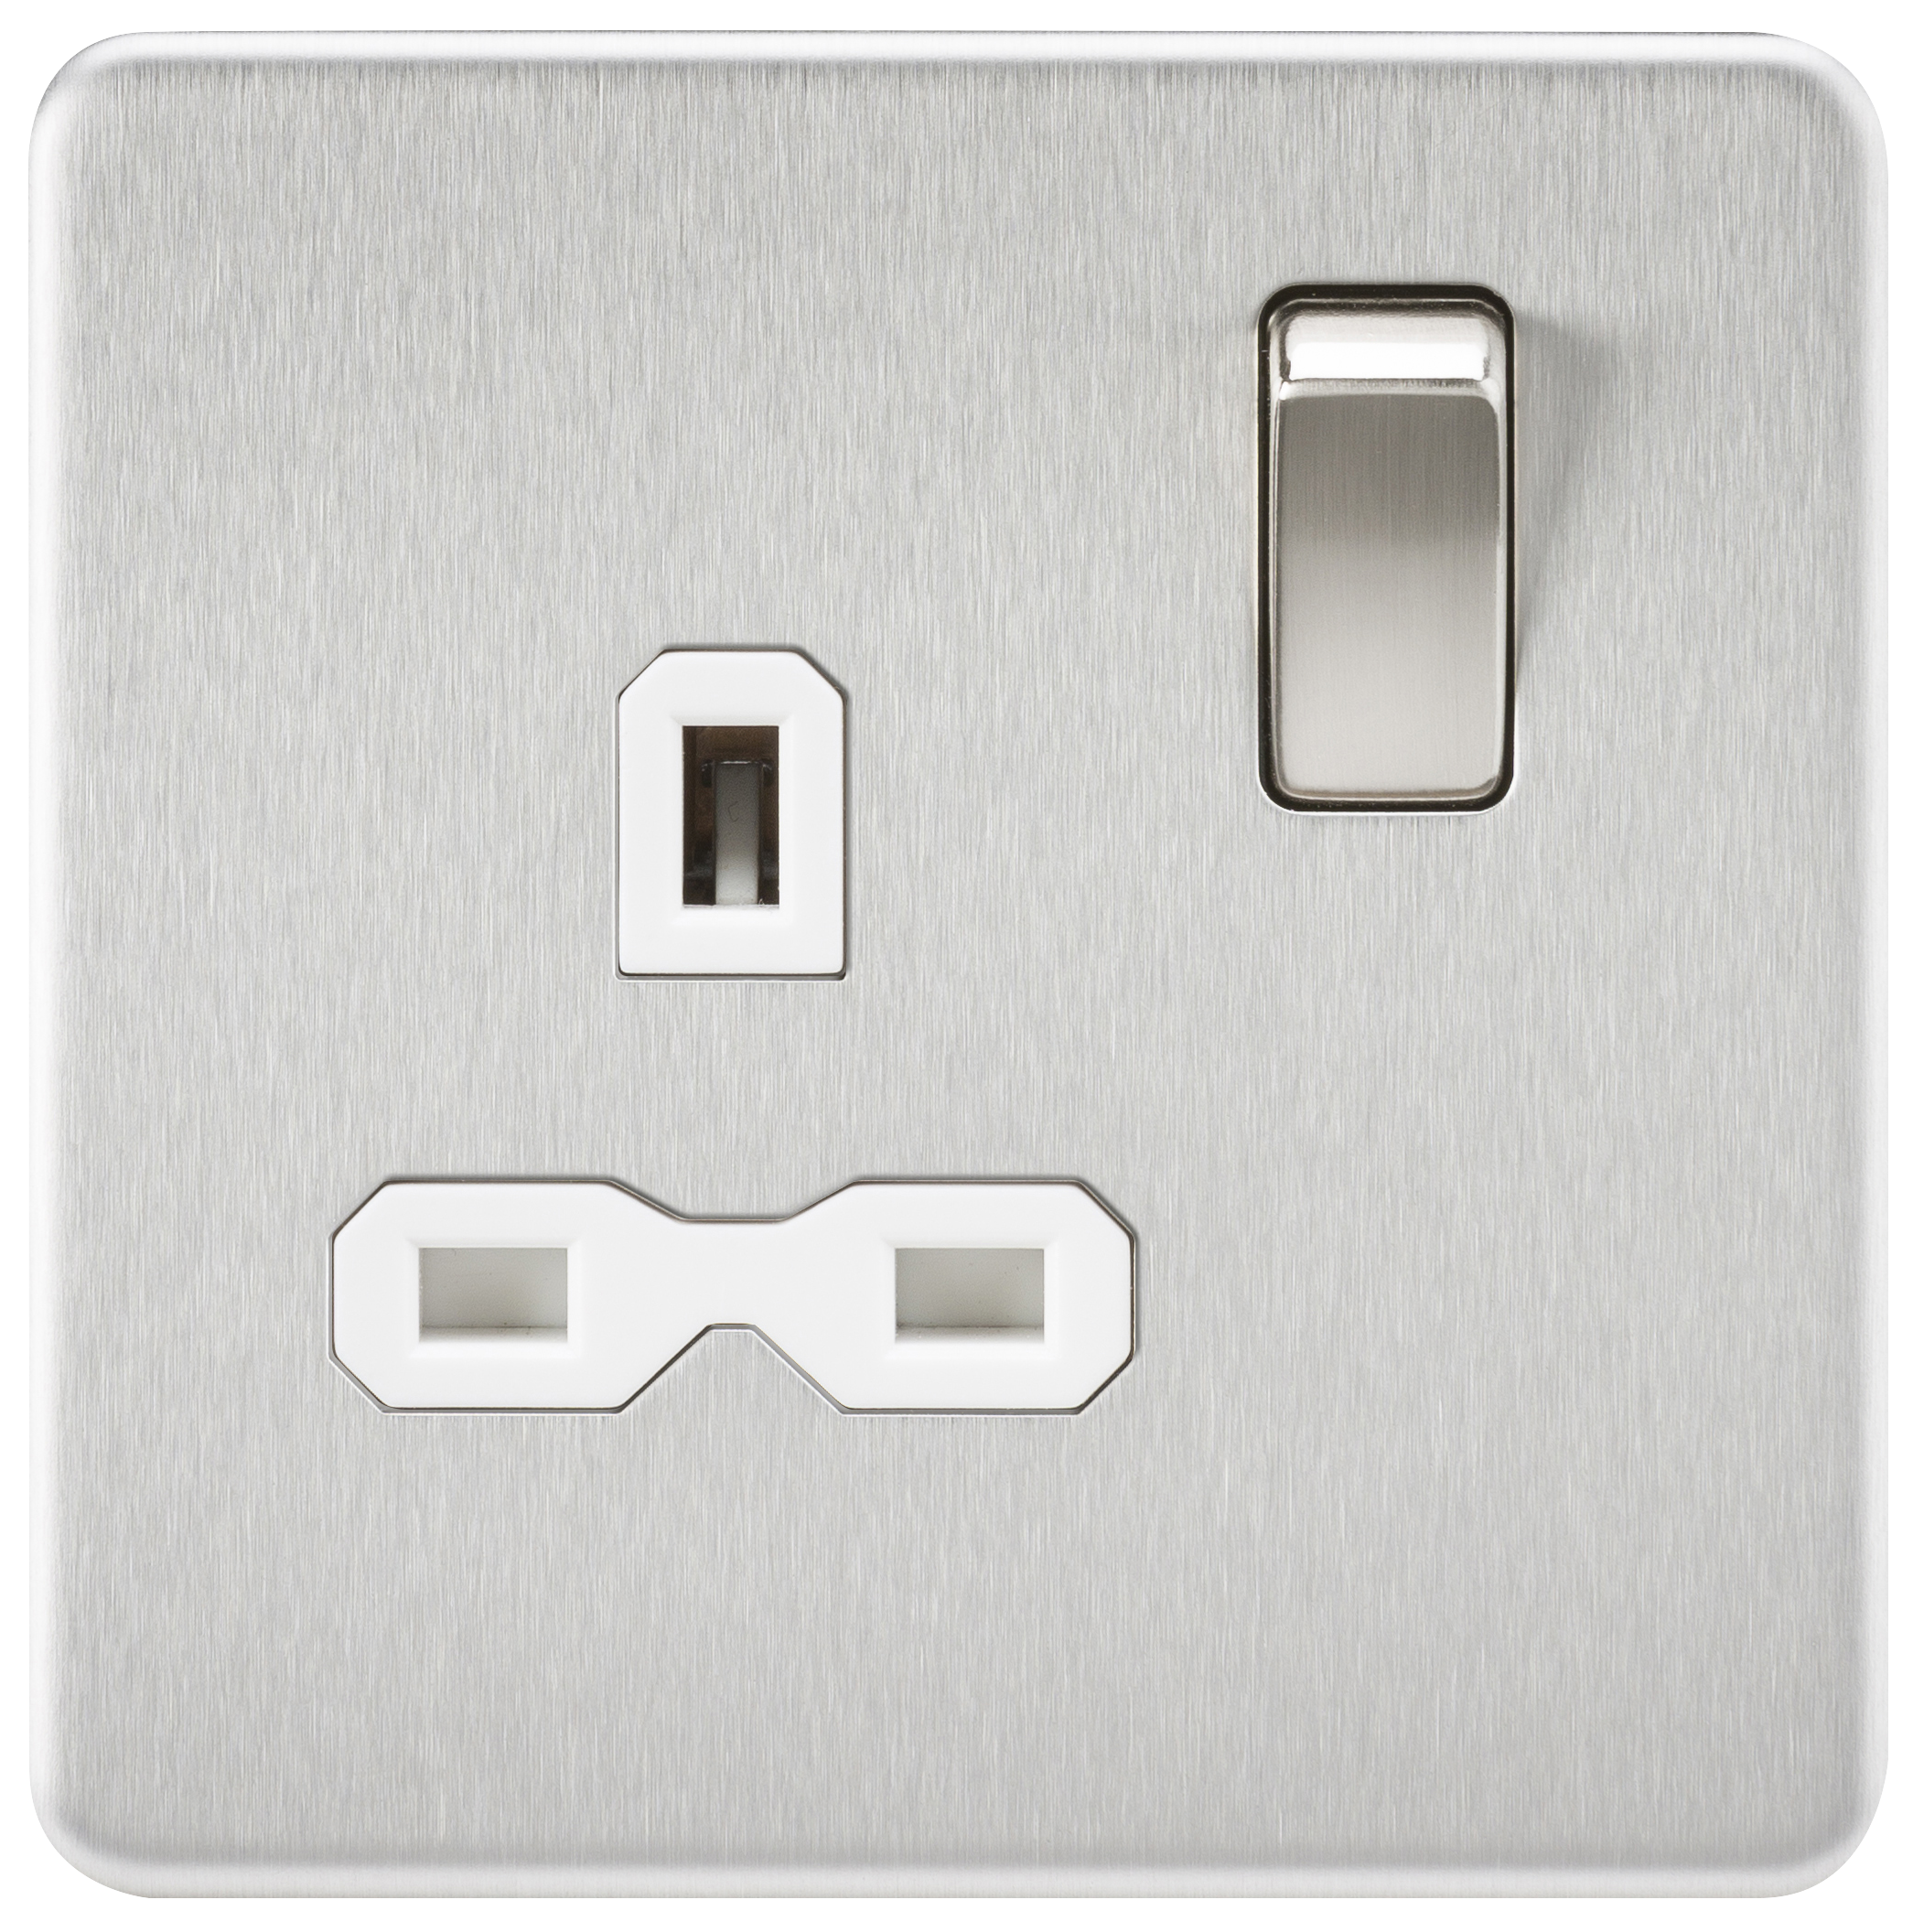 Screwless 13A 1G DP Switched Socket - Brushed Chrome With White Insert - SFR7000BCW 